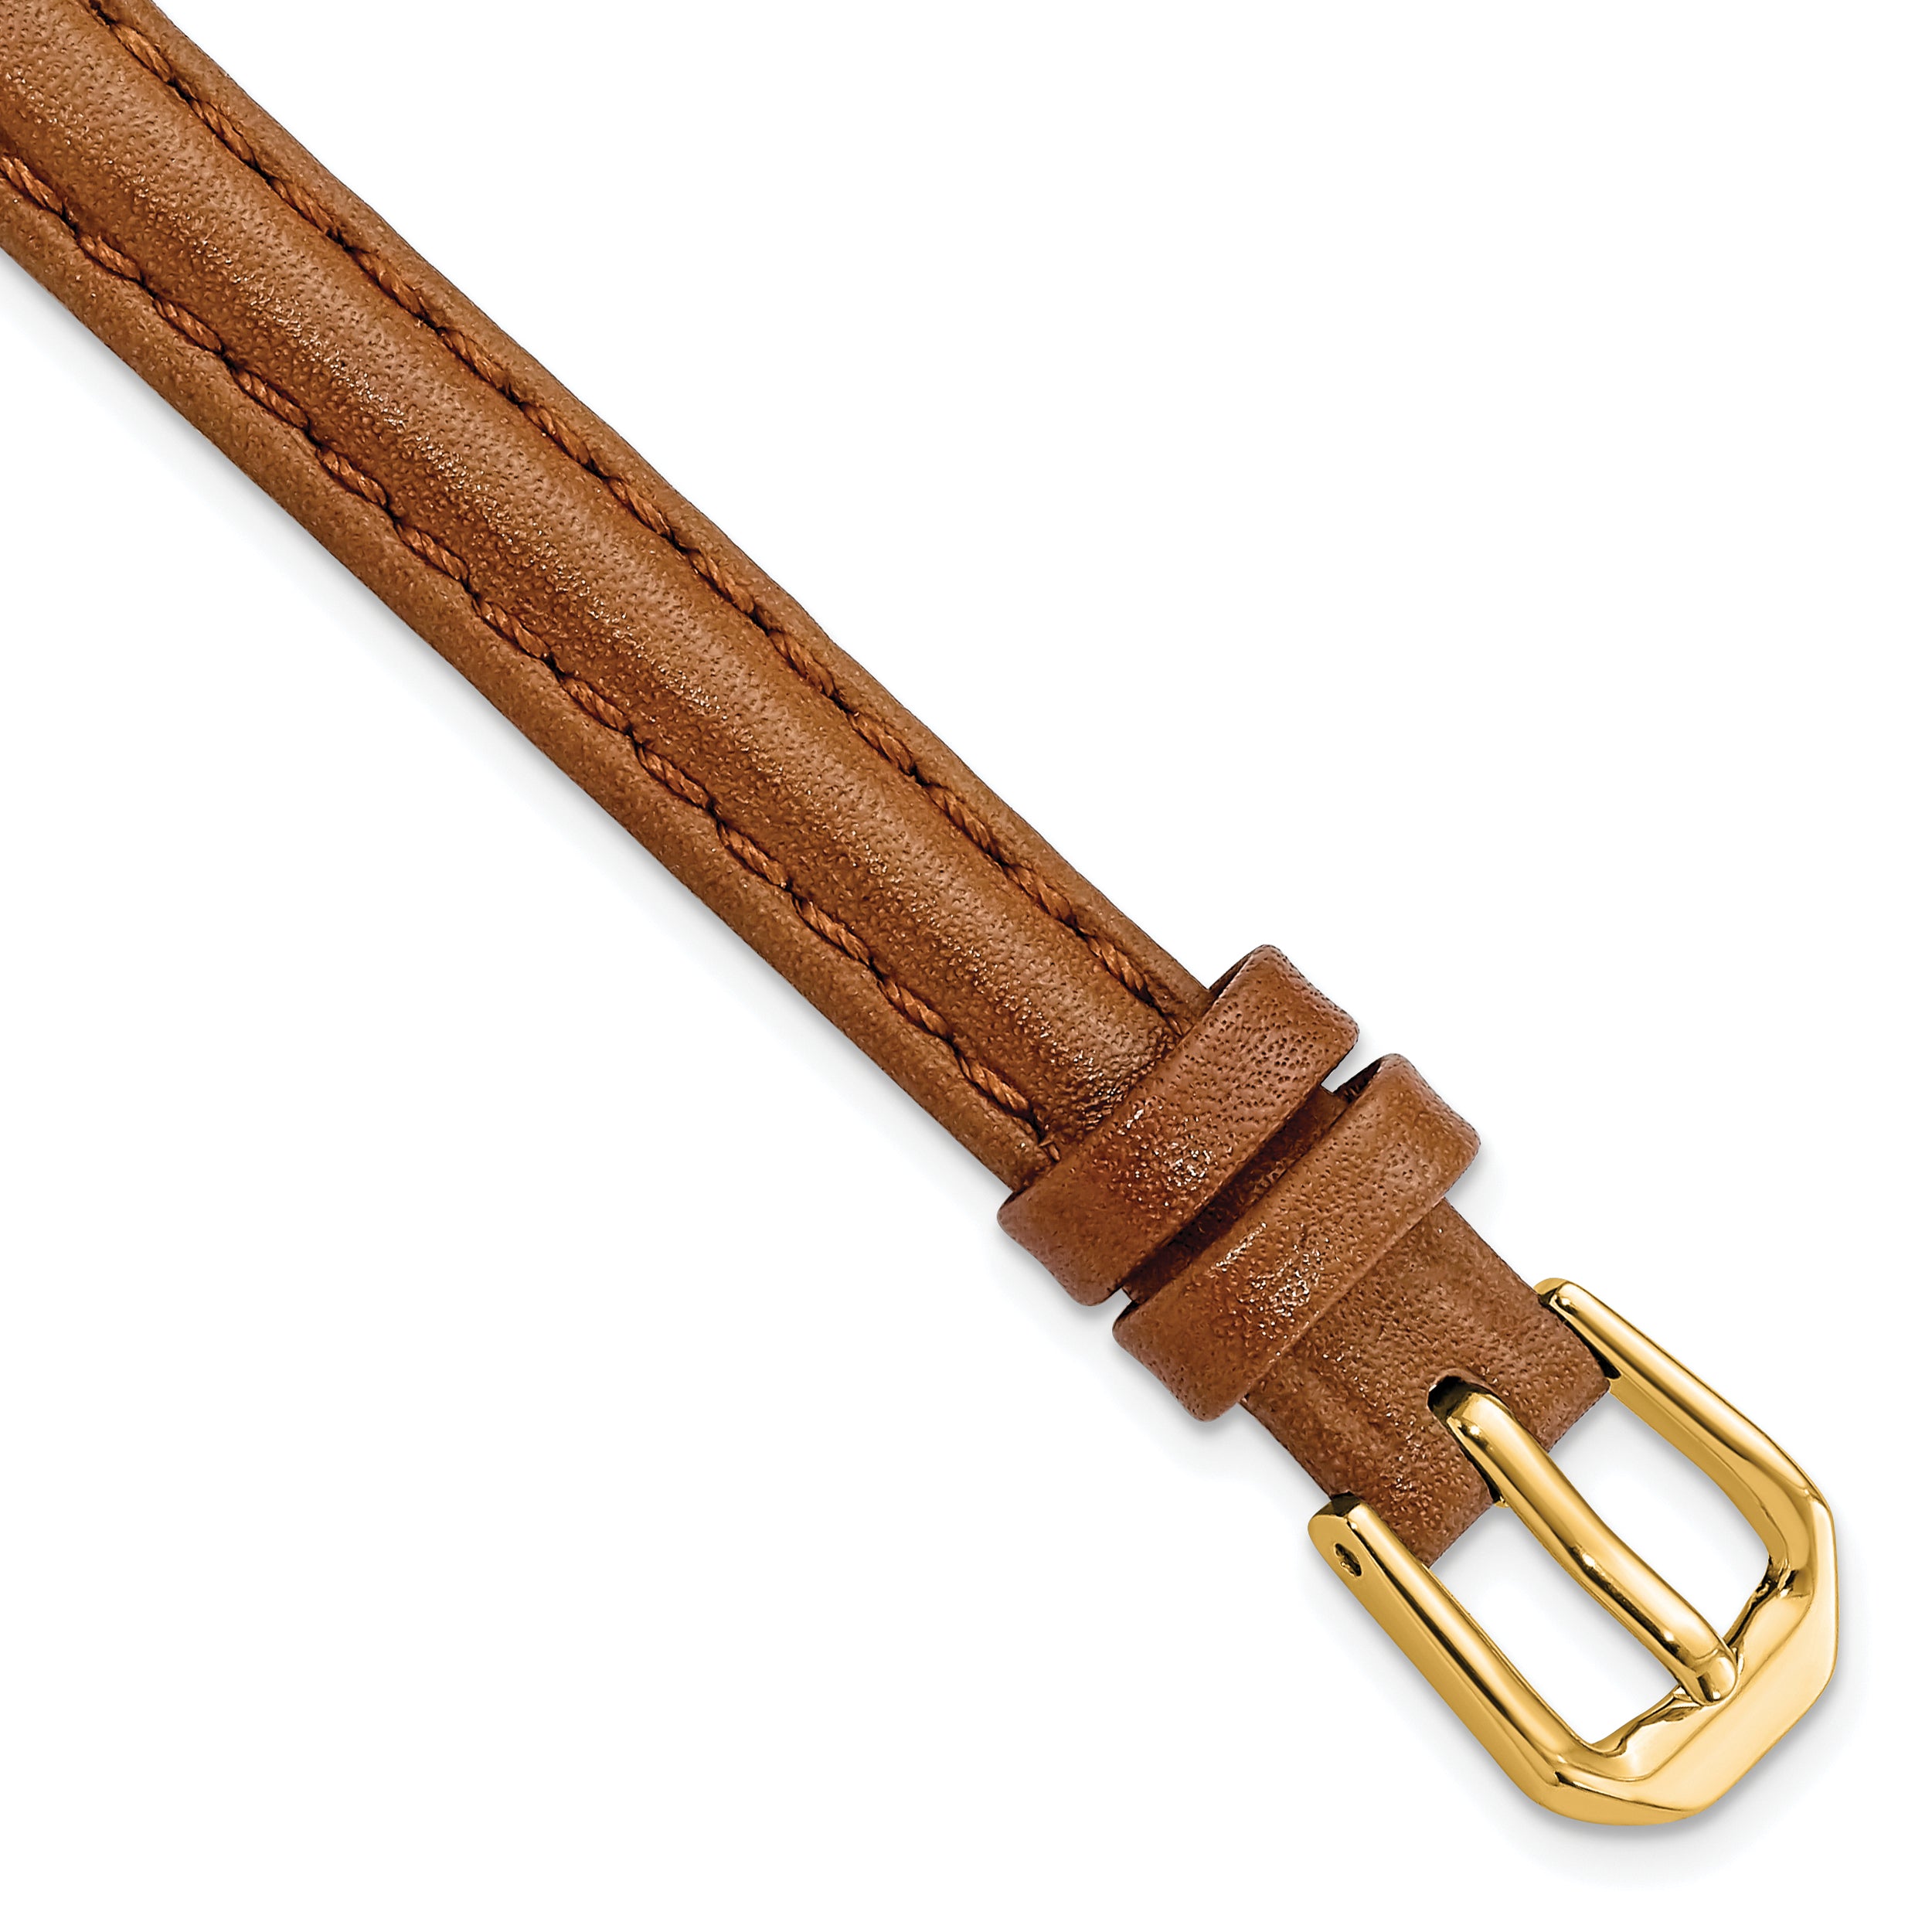 DeBeer 8mm Havana Smooth Leather with Gold-tone Buckle 6.75 inch Watch Band